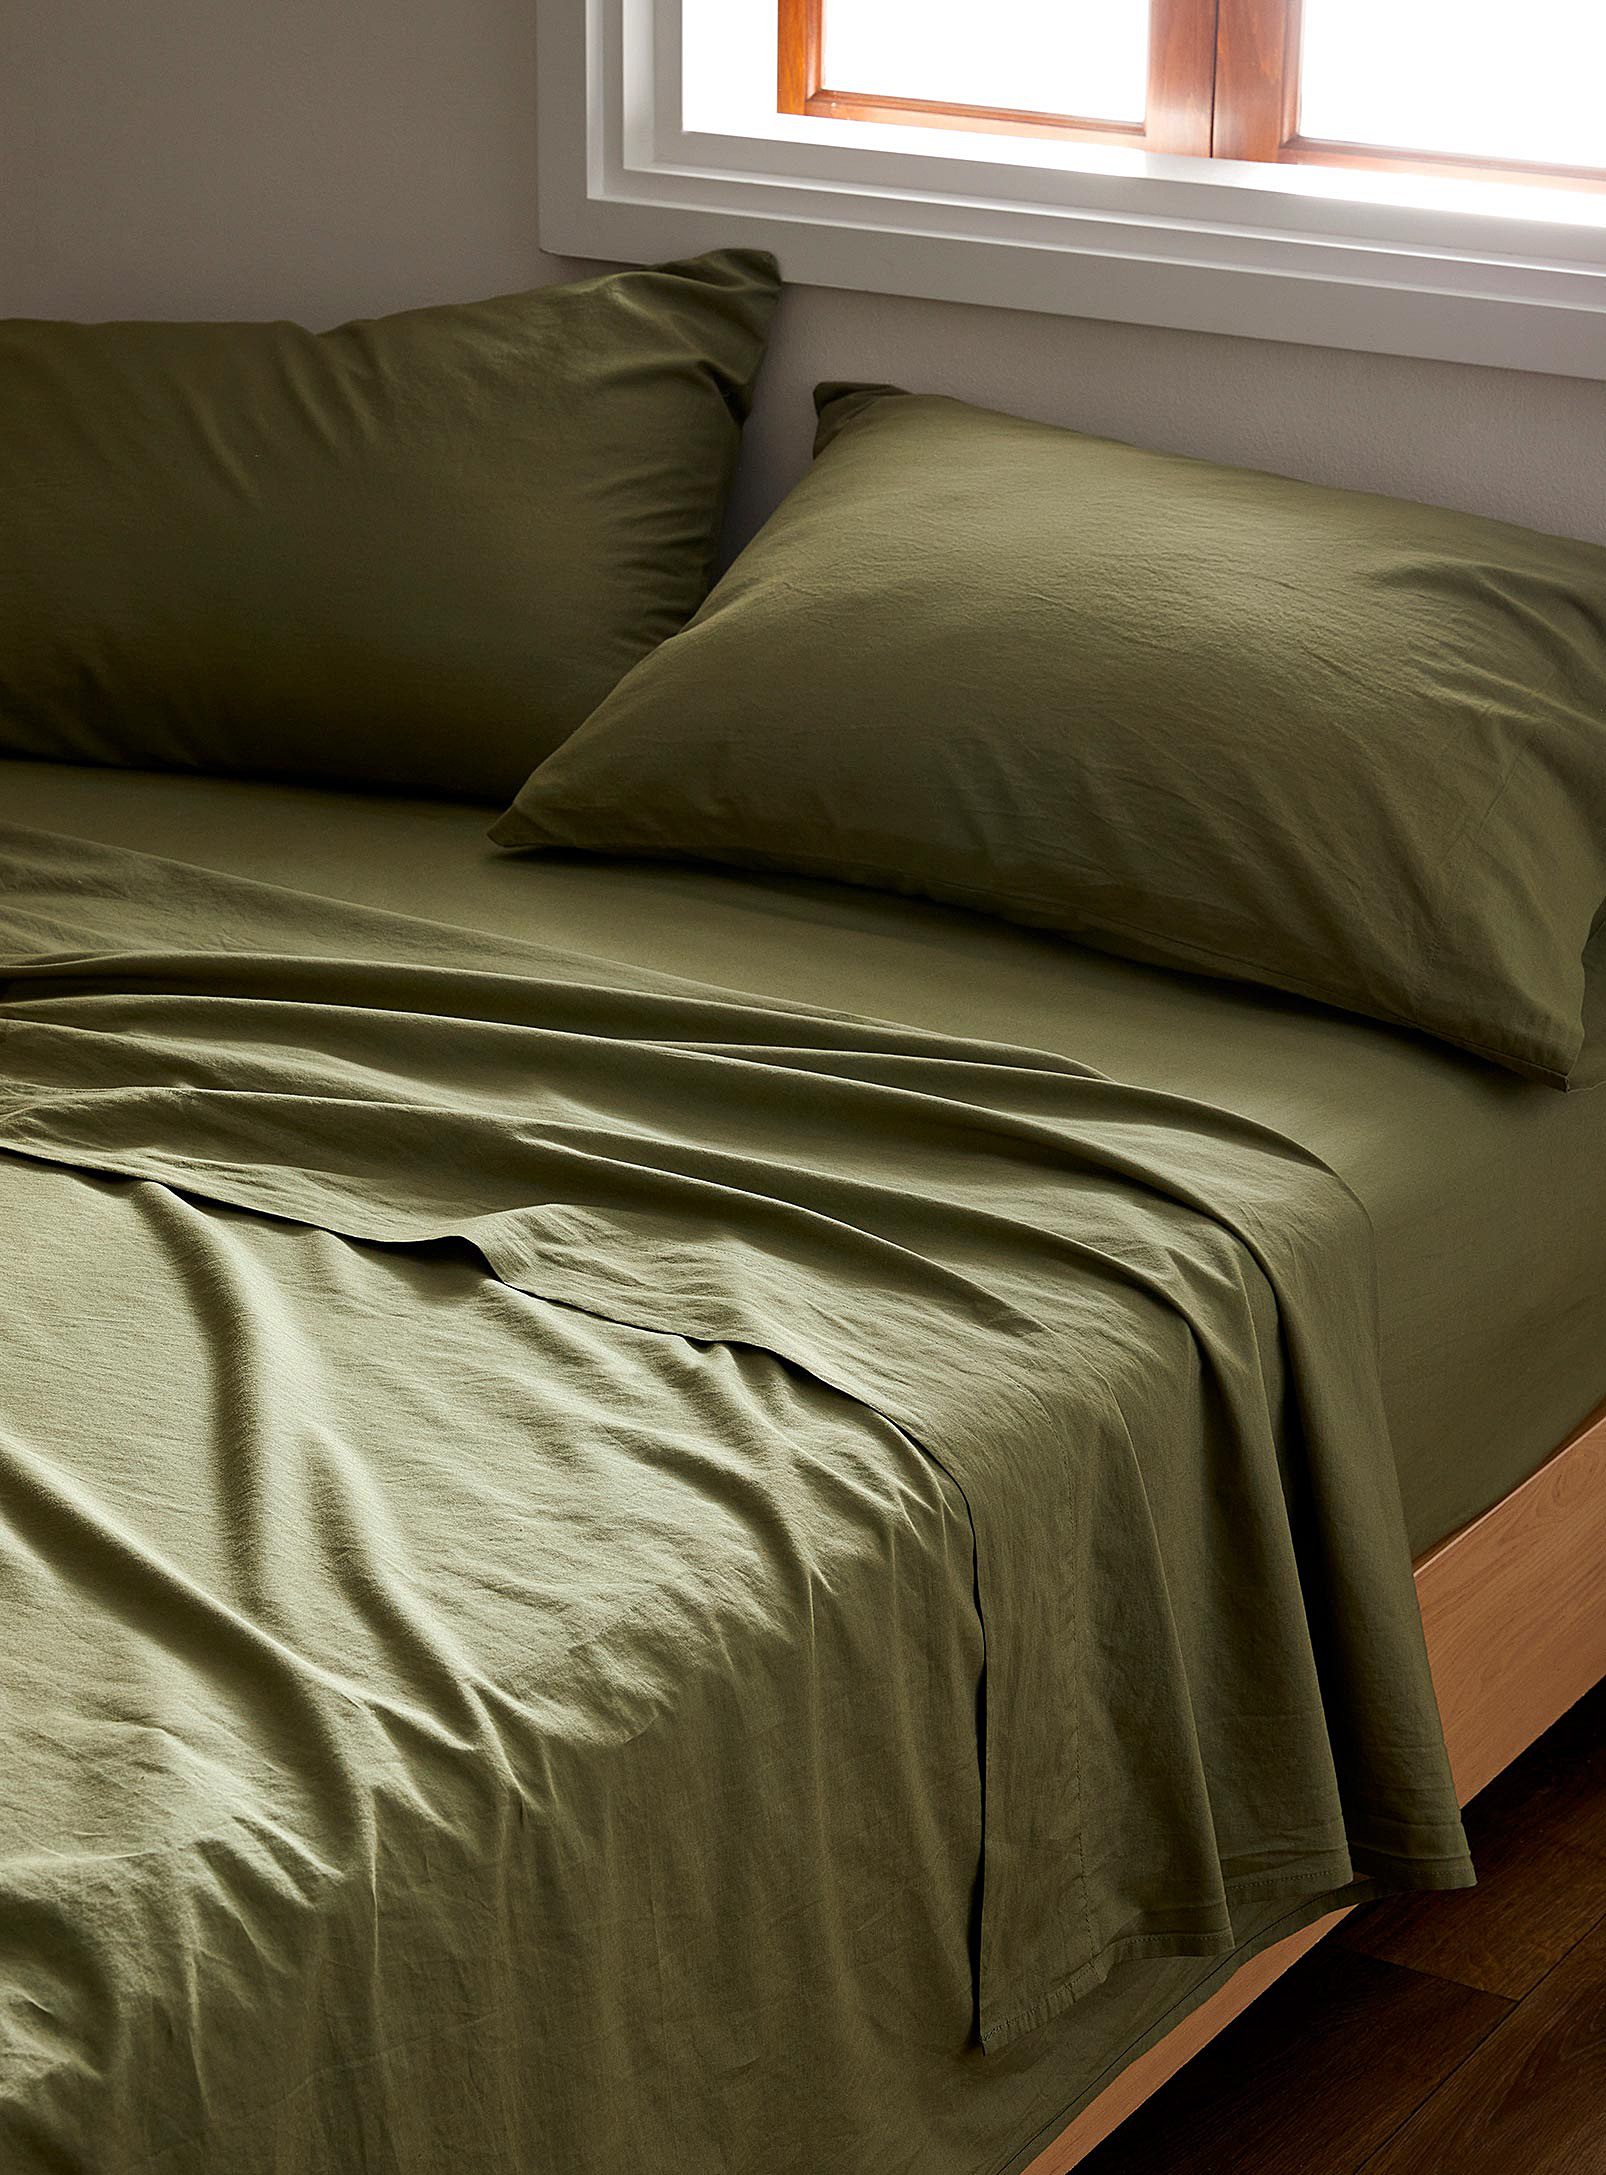 Simons Maison Faded Organic Cotton Sheet Set Fits Mattresses Up To 16 In In Khaki/sage/olive